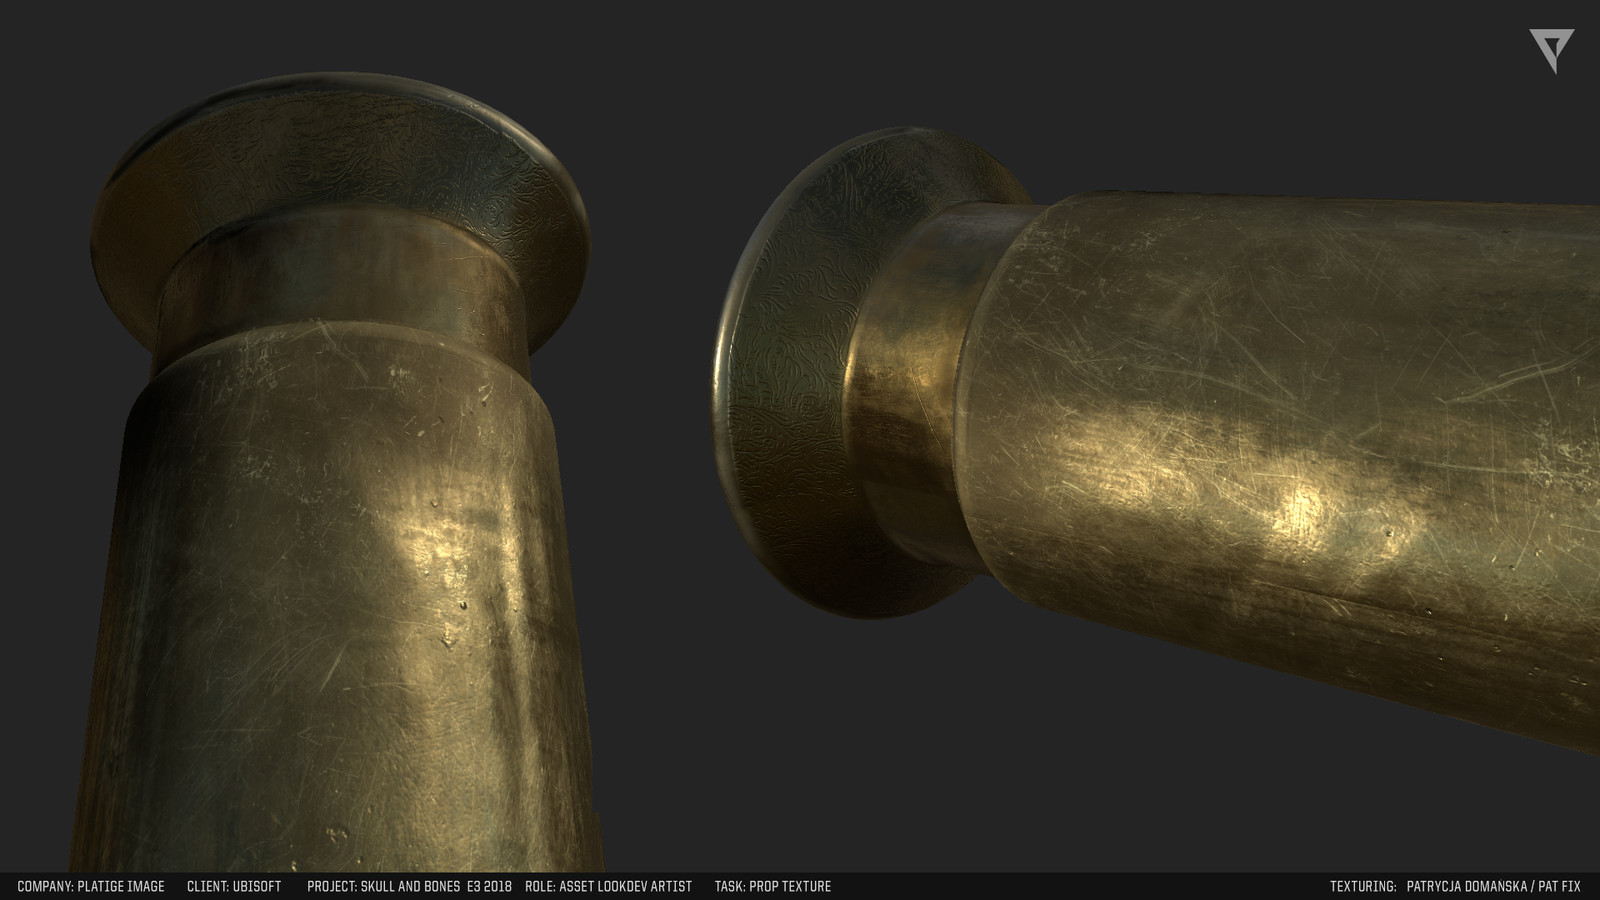 Substance painter view